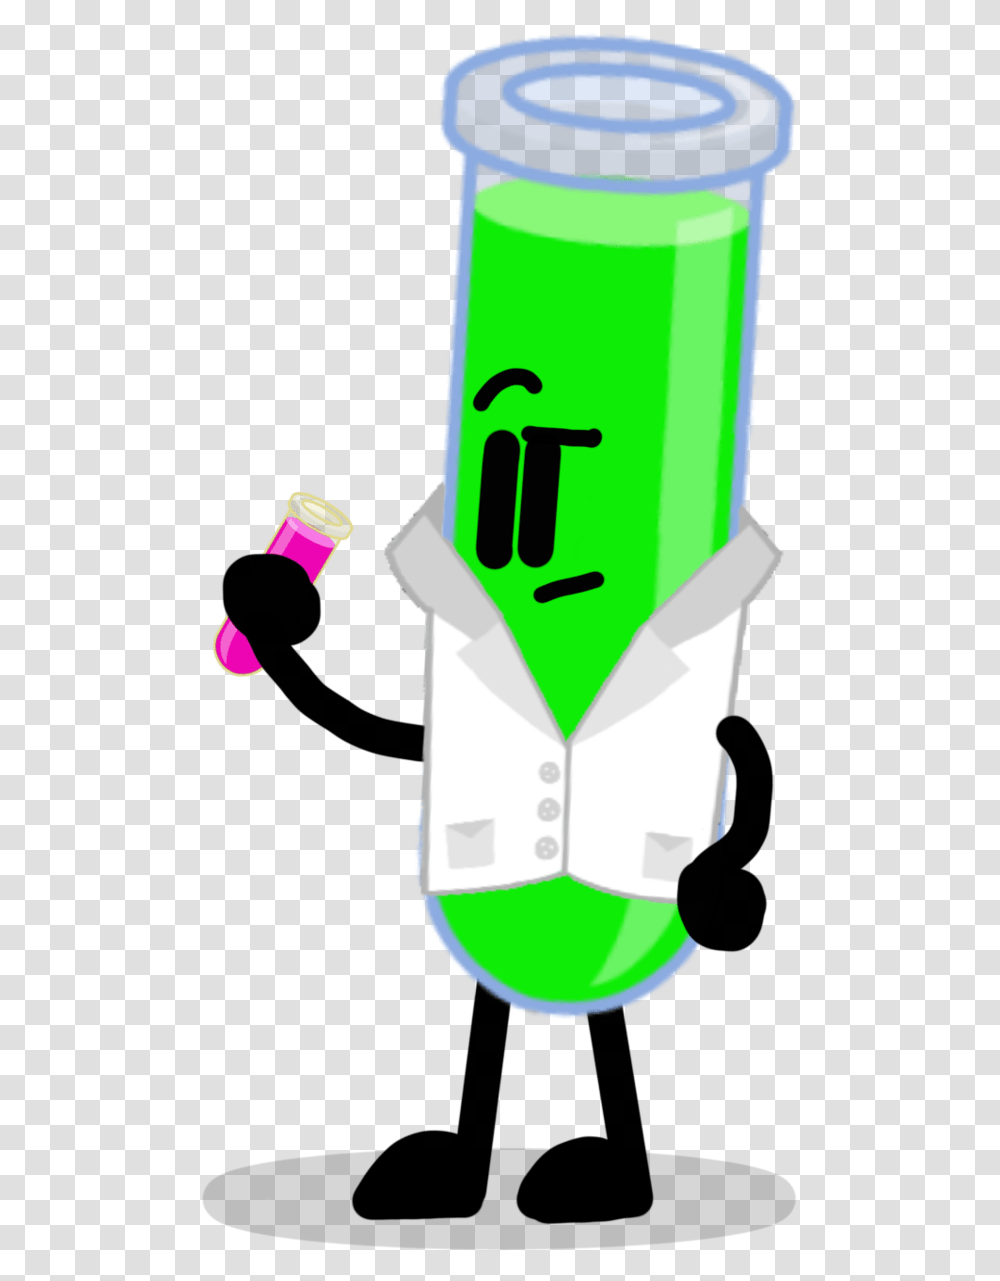 Tube The Nerd By Science Test Tube, Plot, Rubber Eraser Transparent Png